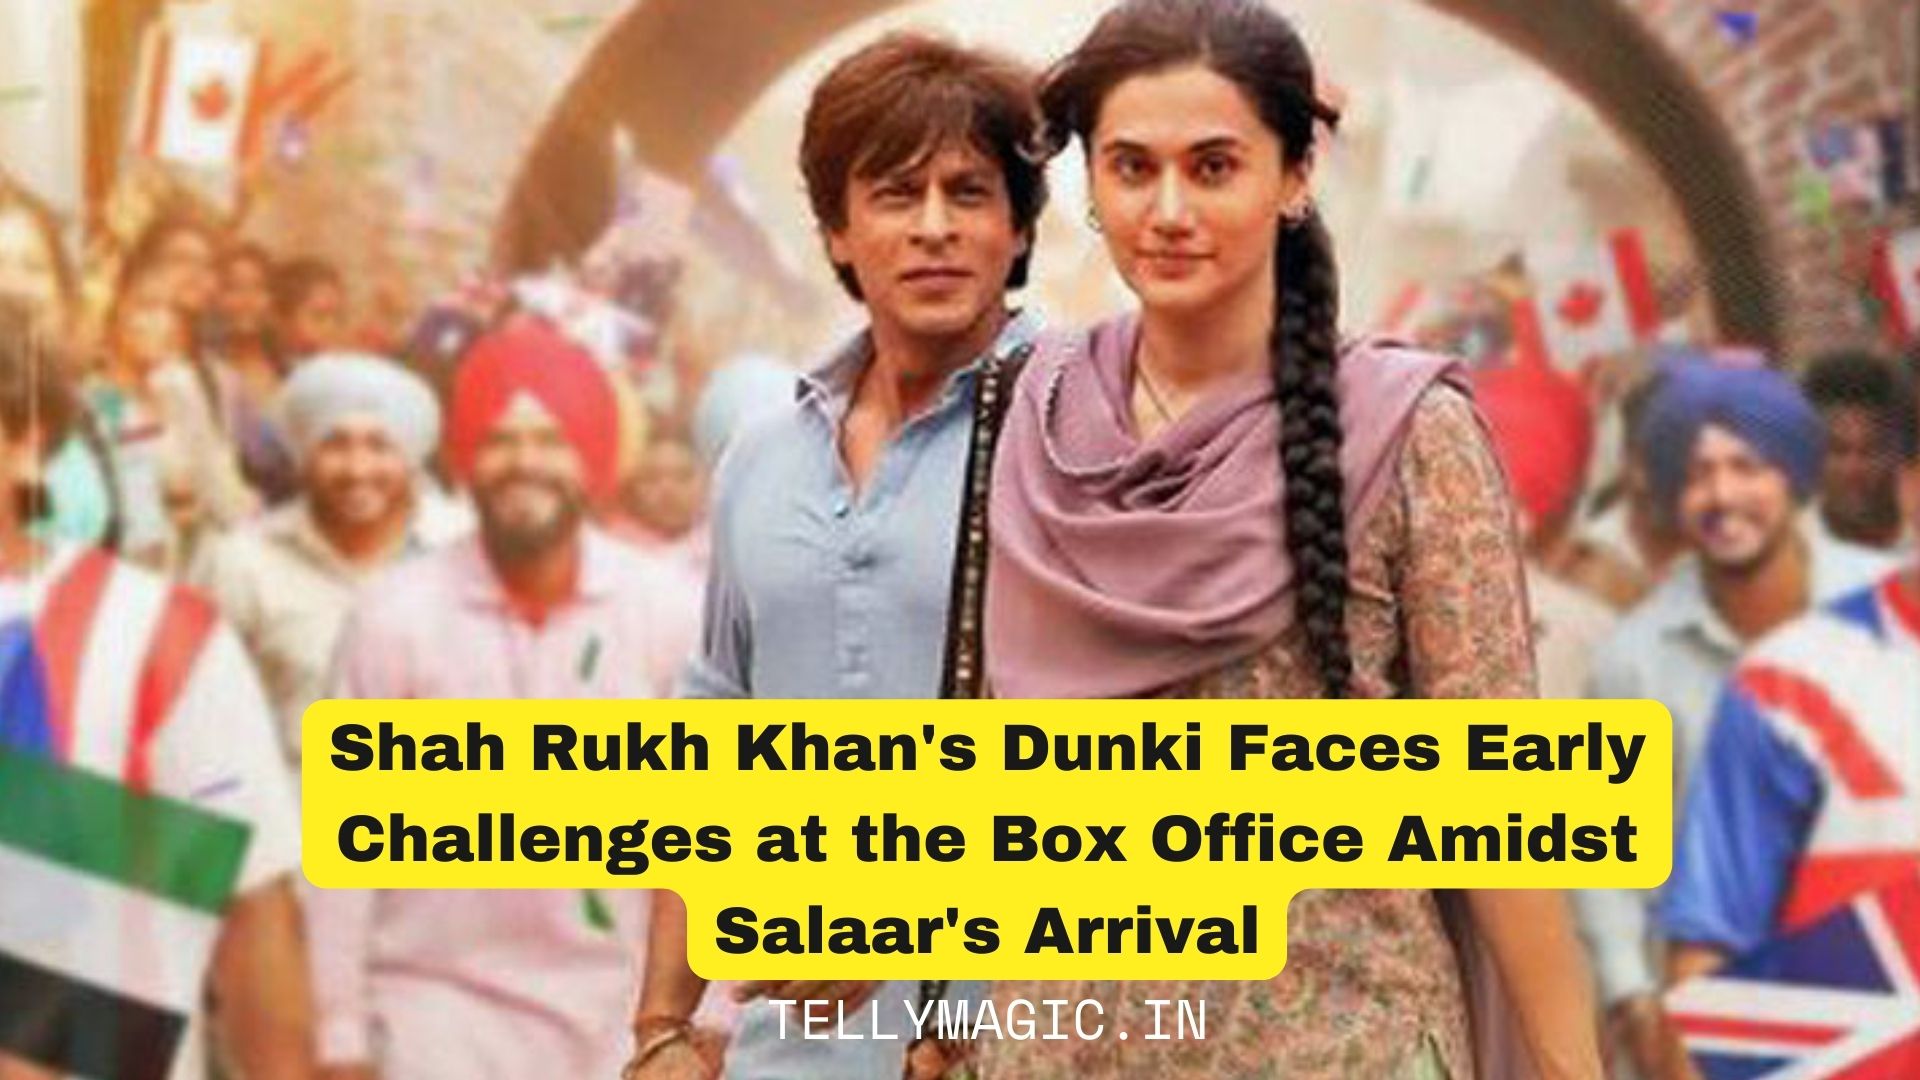 Shah Rukh Khan’s Dunki Faces Early Challenges at the Box Office Amidst Salaar’s Arrival